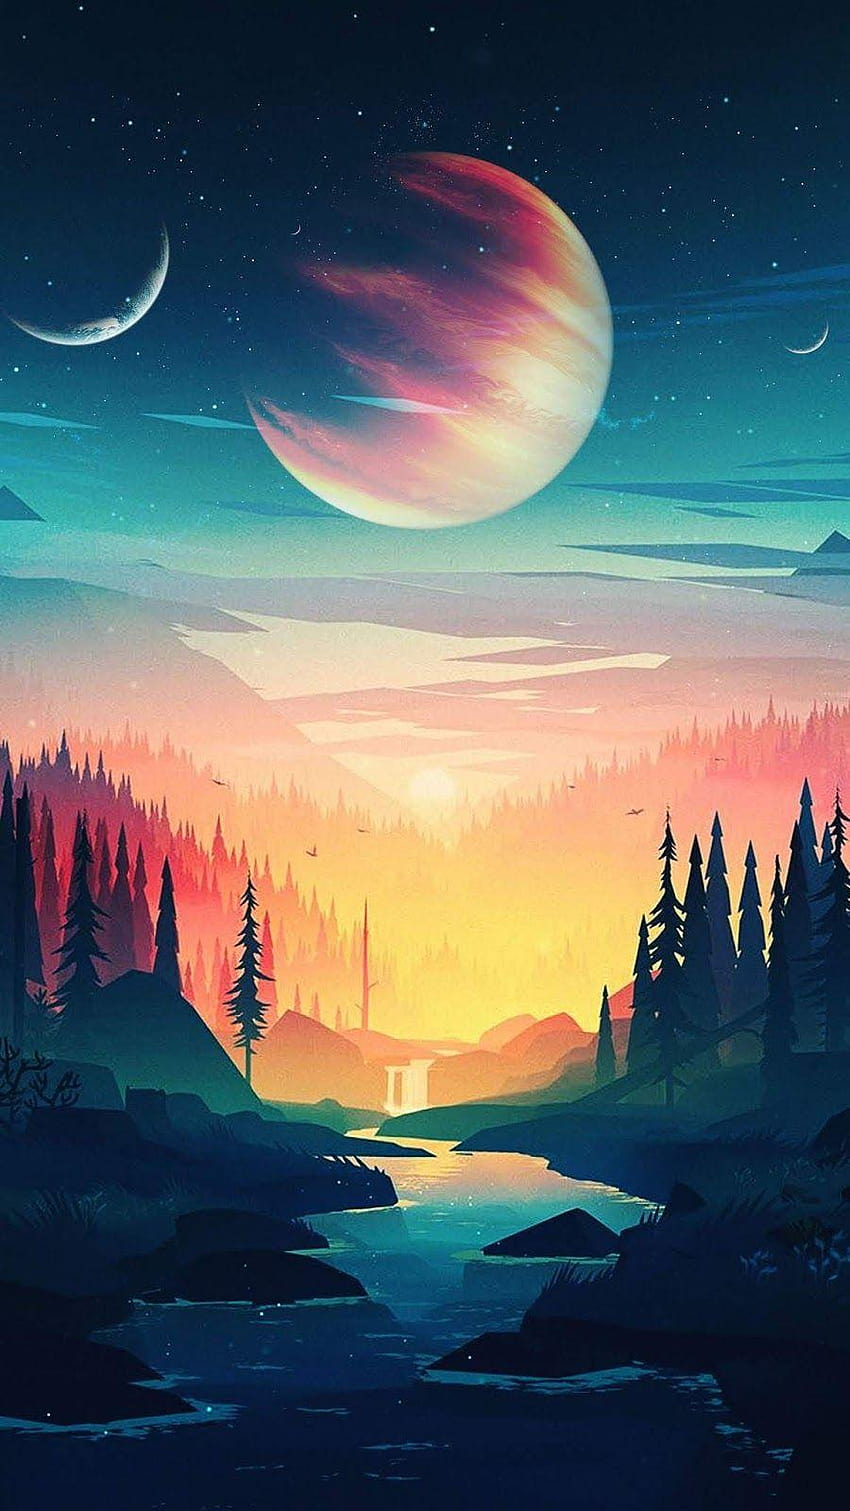 A landscape painting of a planet with a river and trees. - Landscape